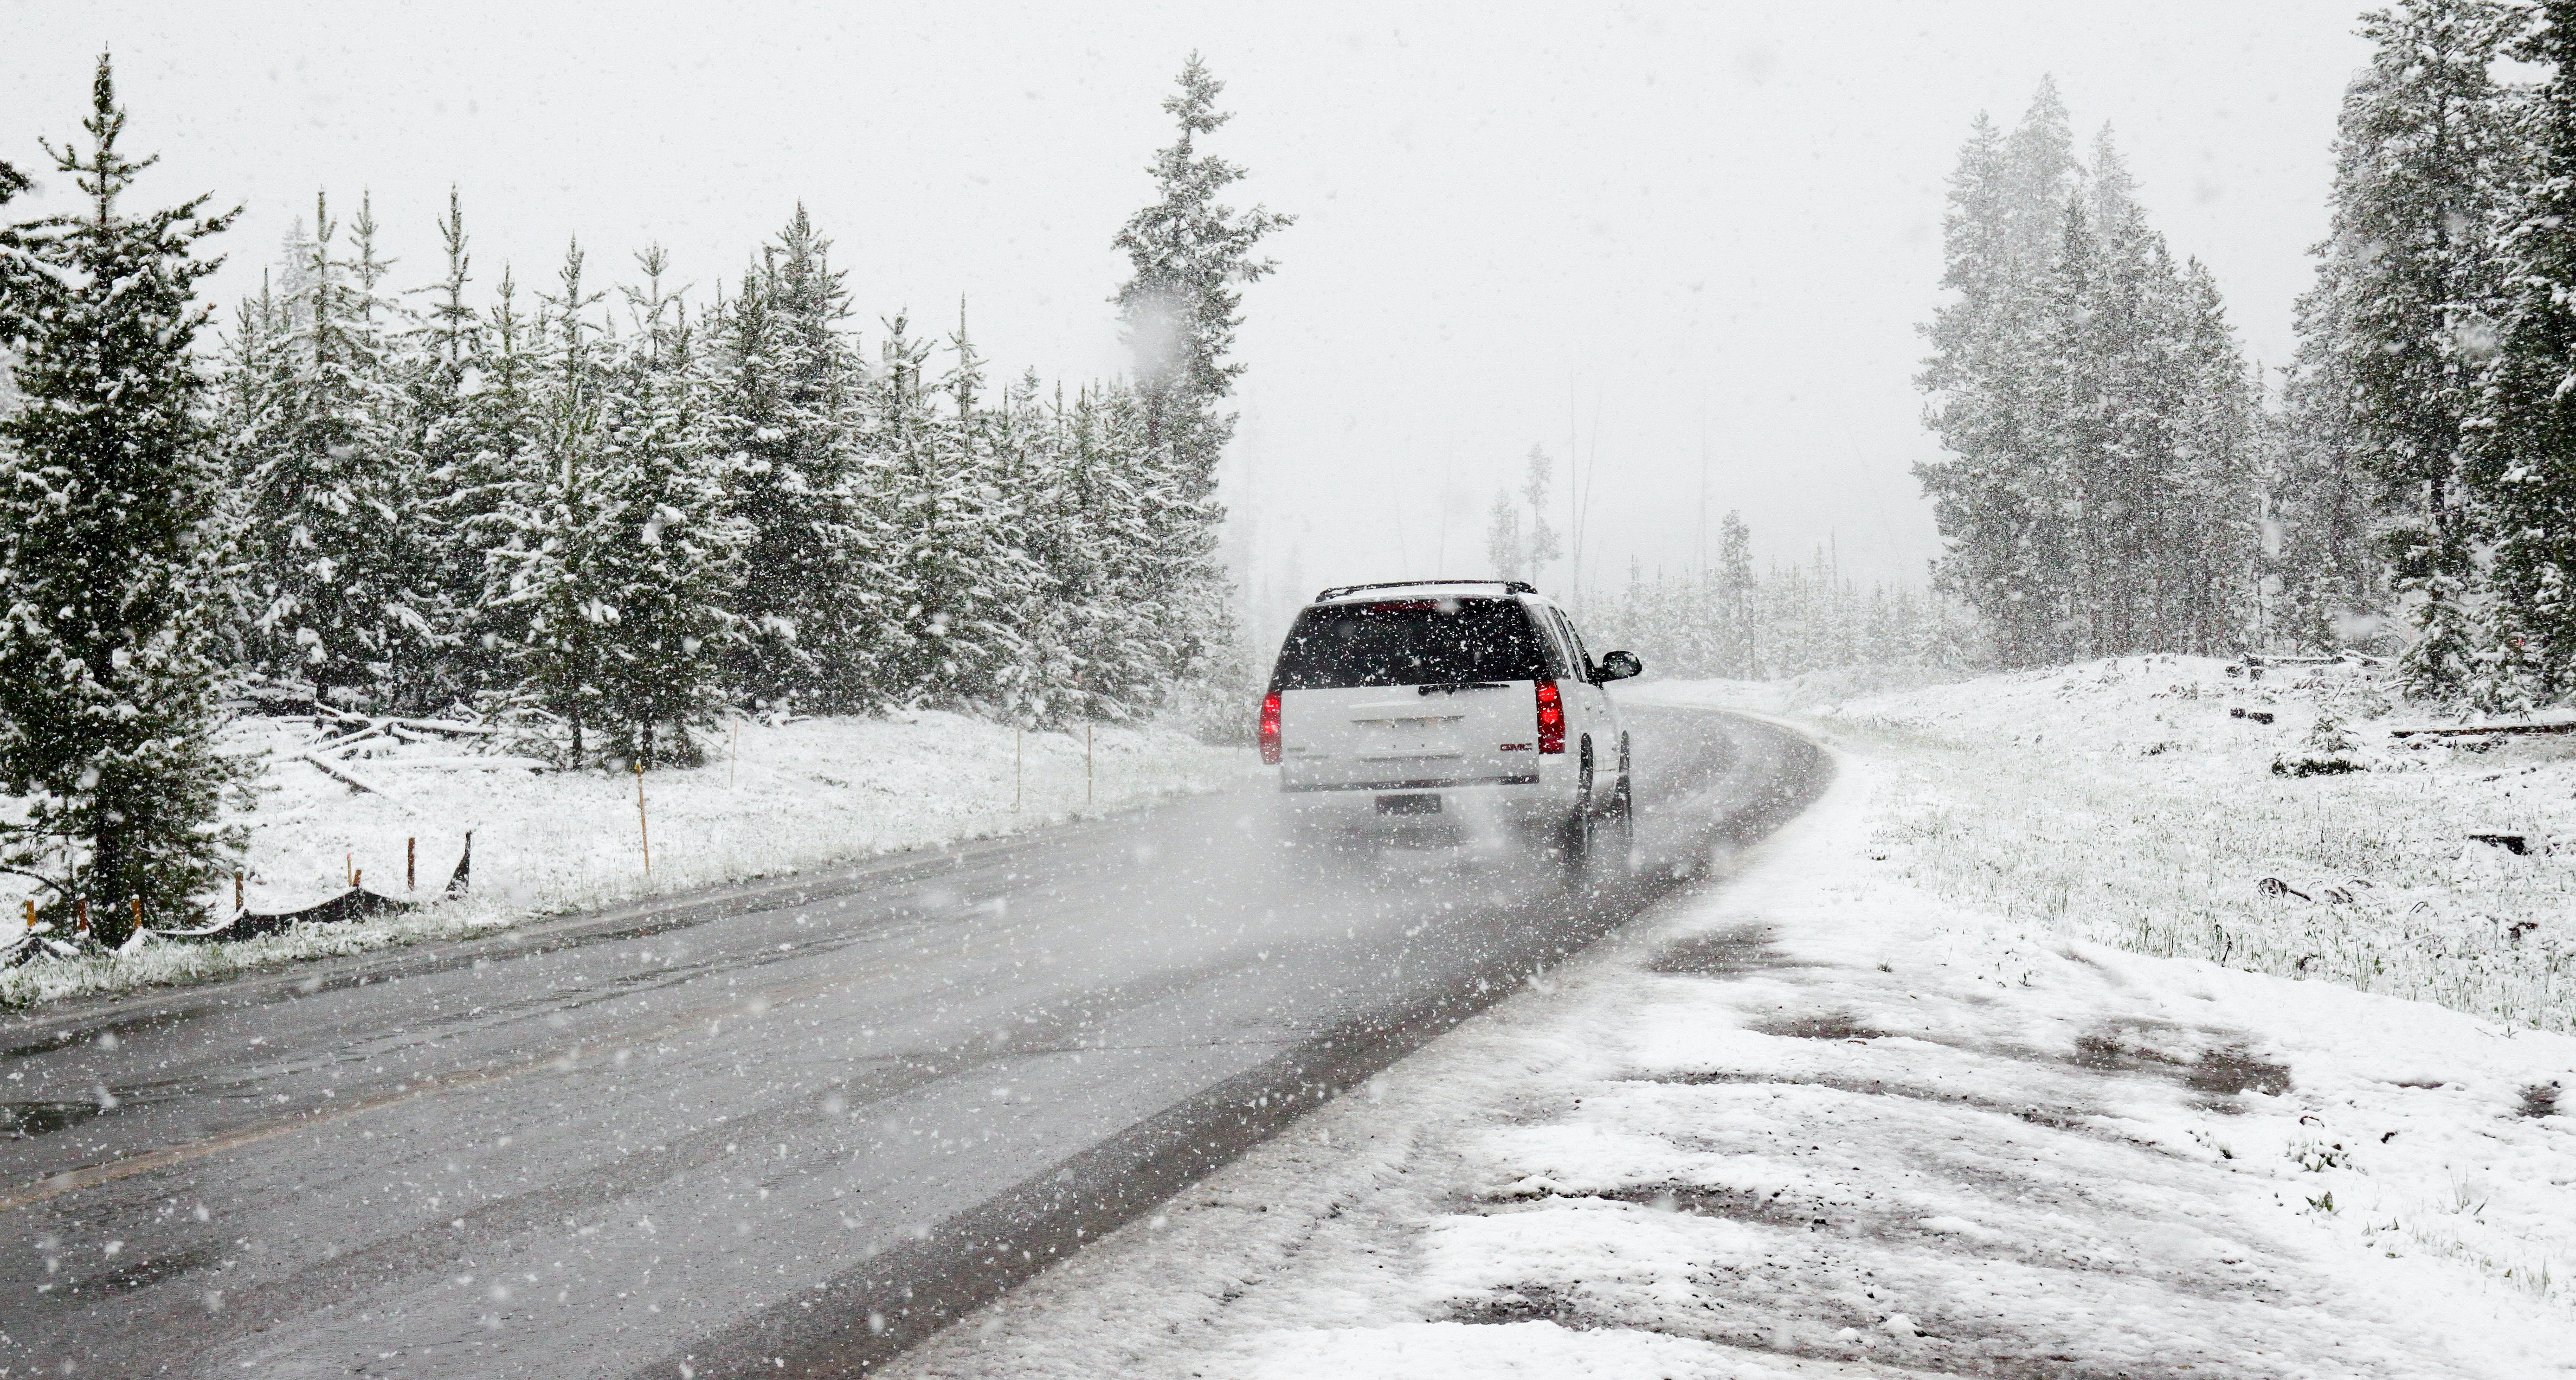 Car driving during snowy weather conditions and causing tire wear.